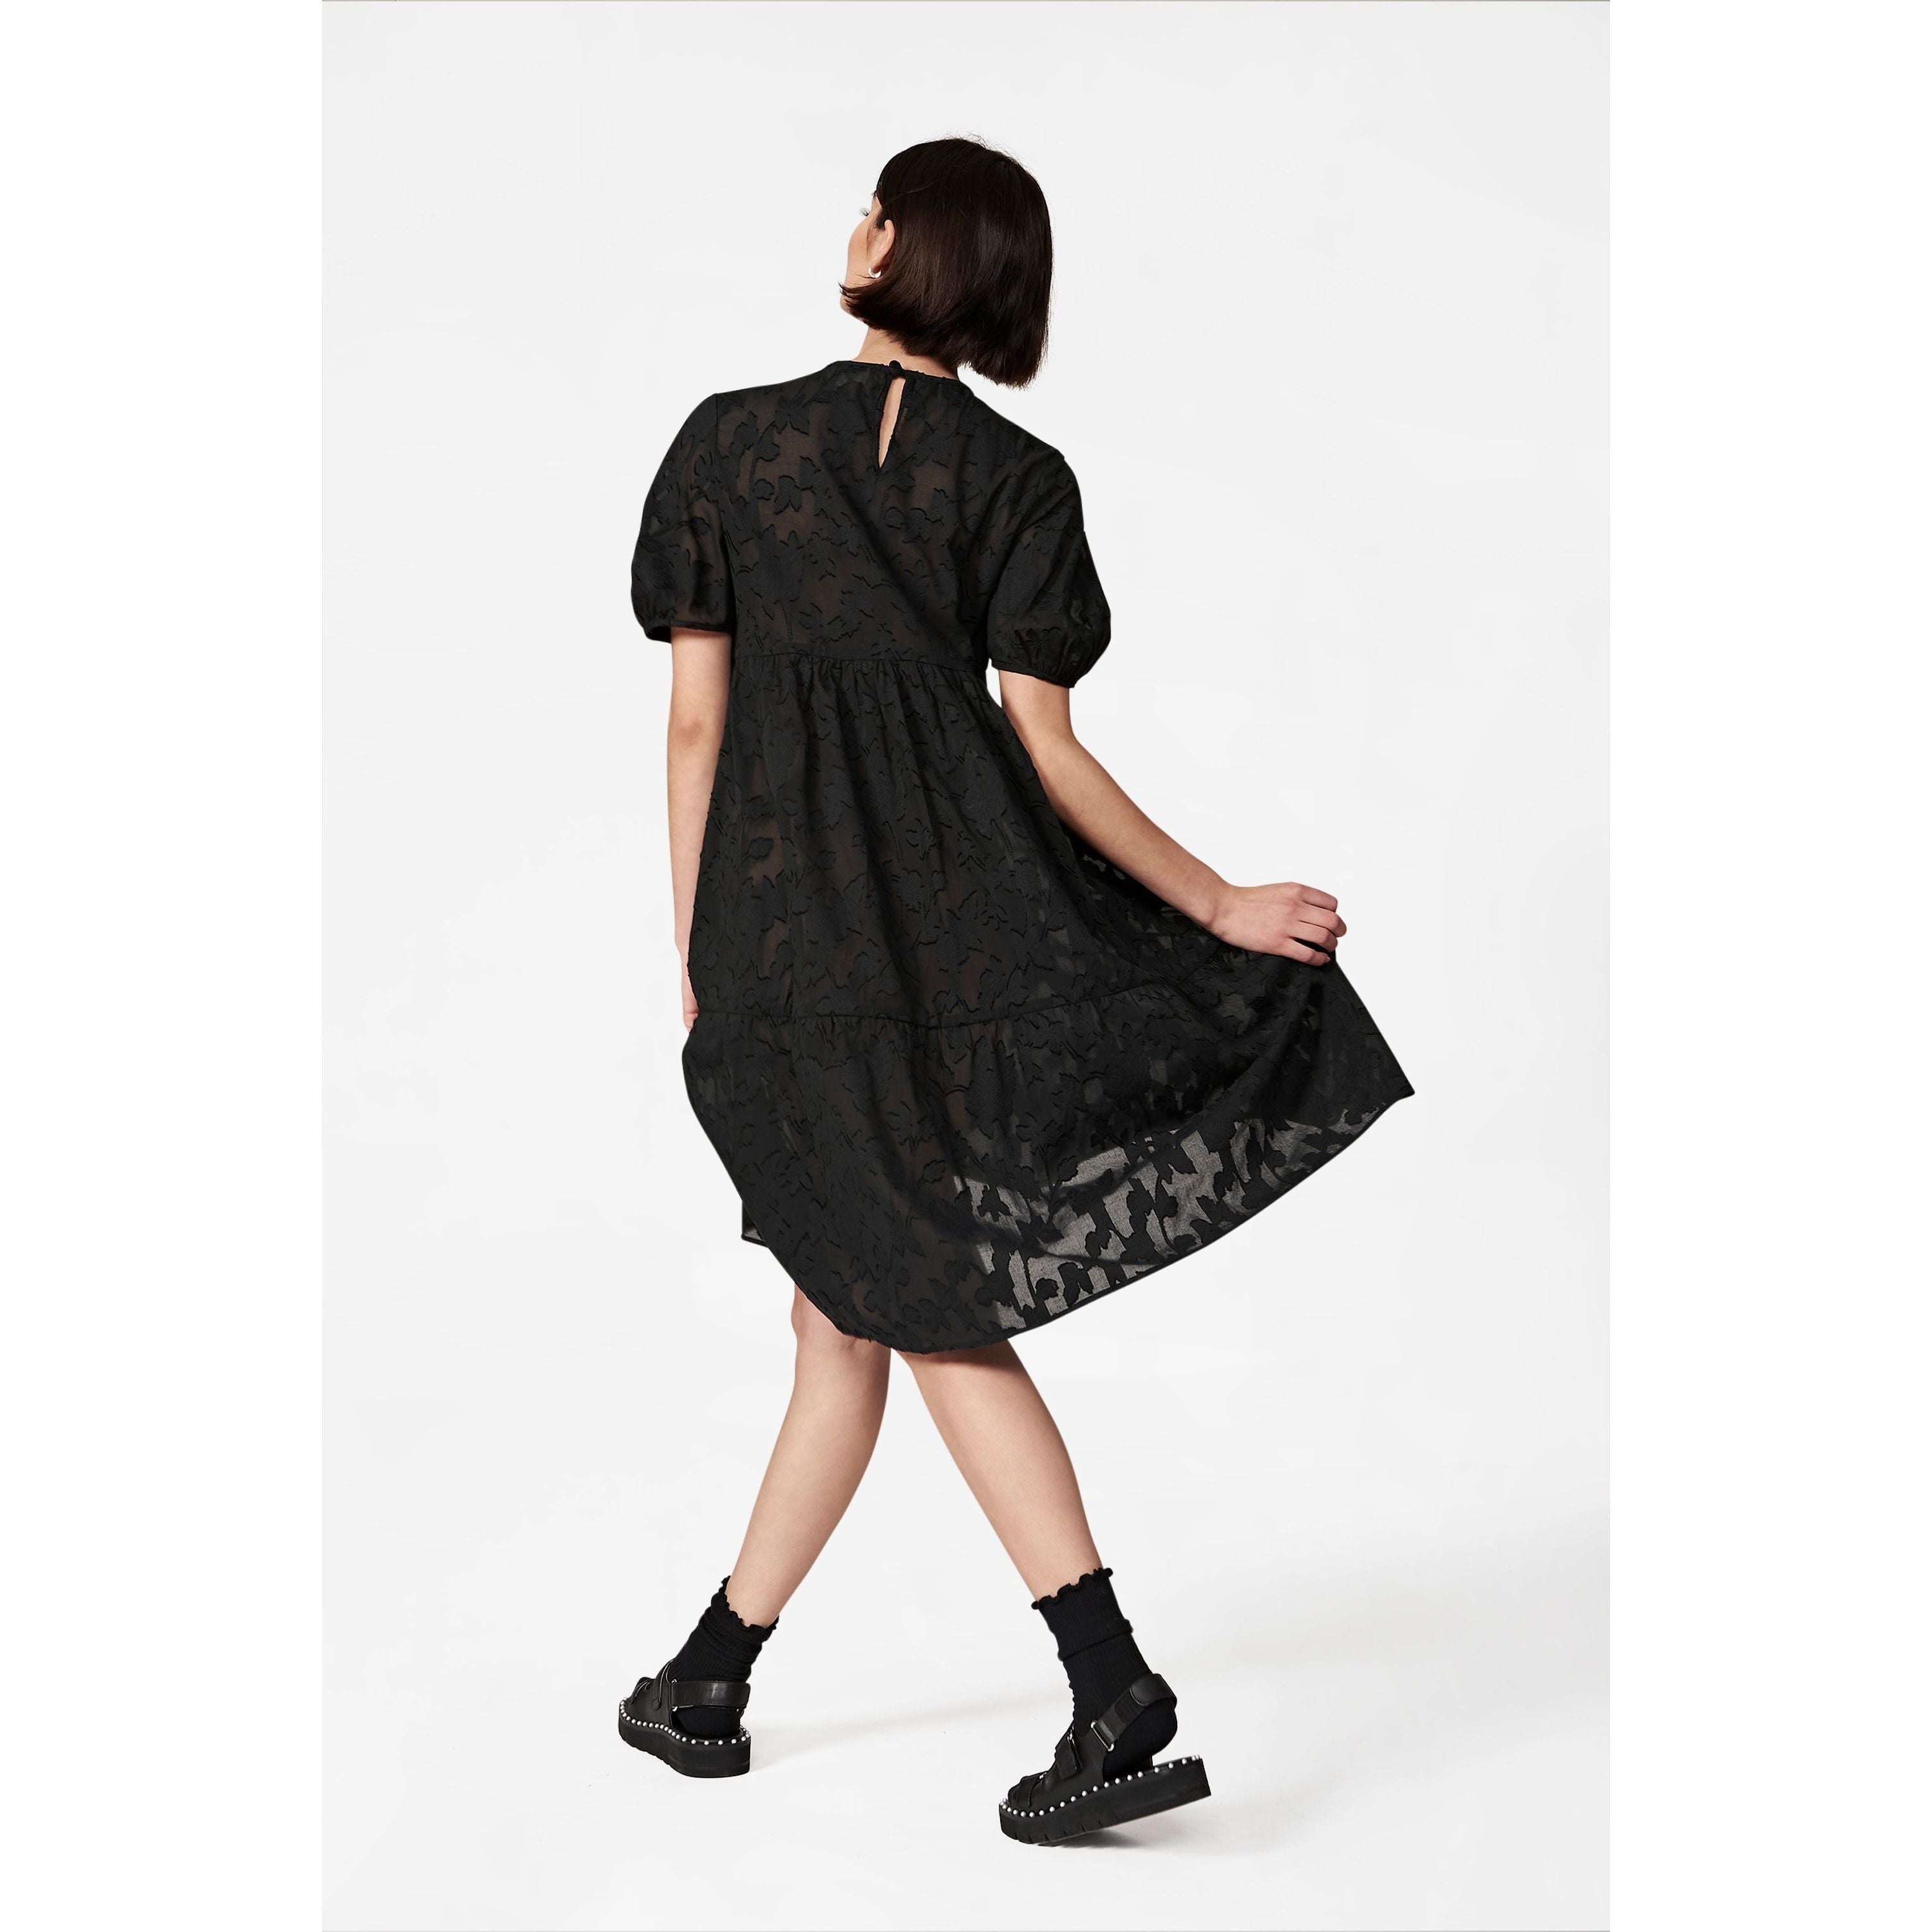 Women's Madeline Dress in Black Floral Jacquard by Casey Marks